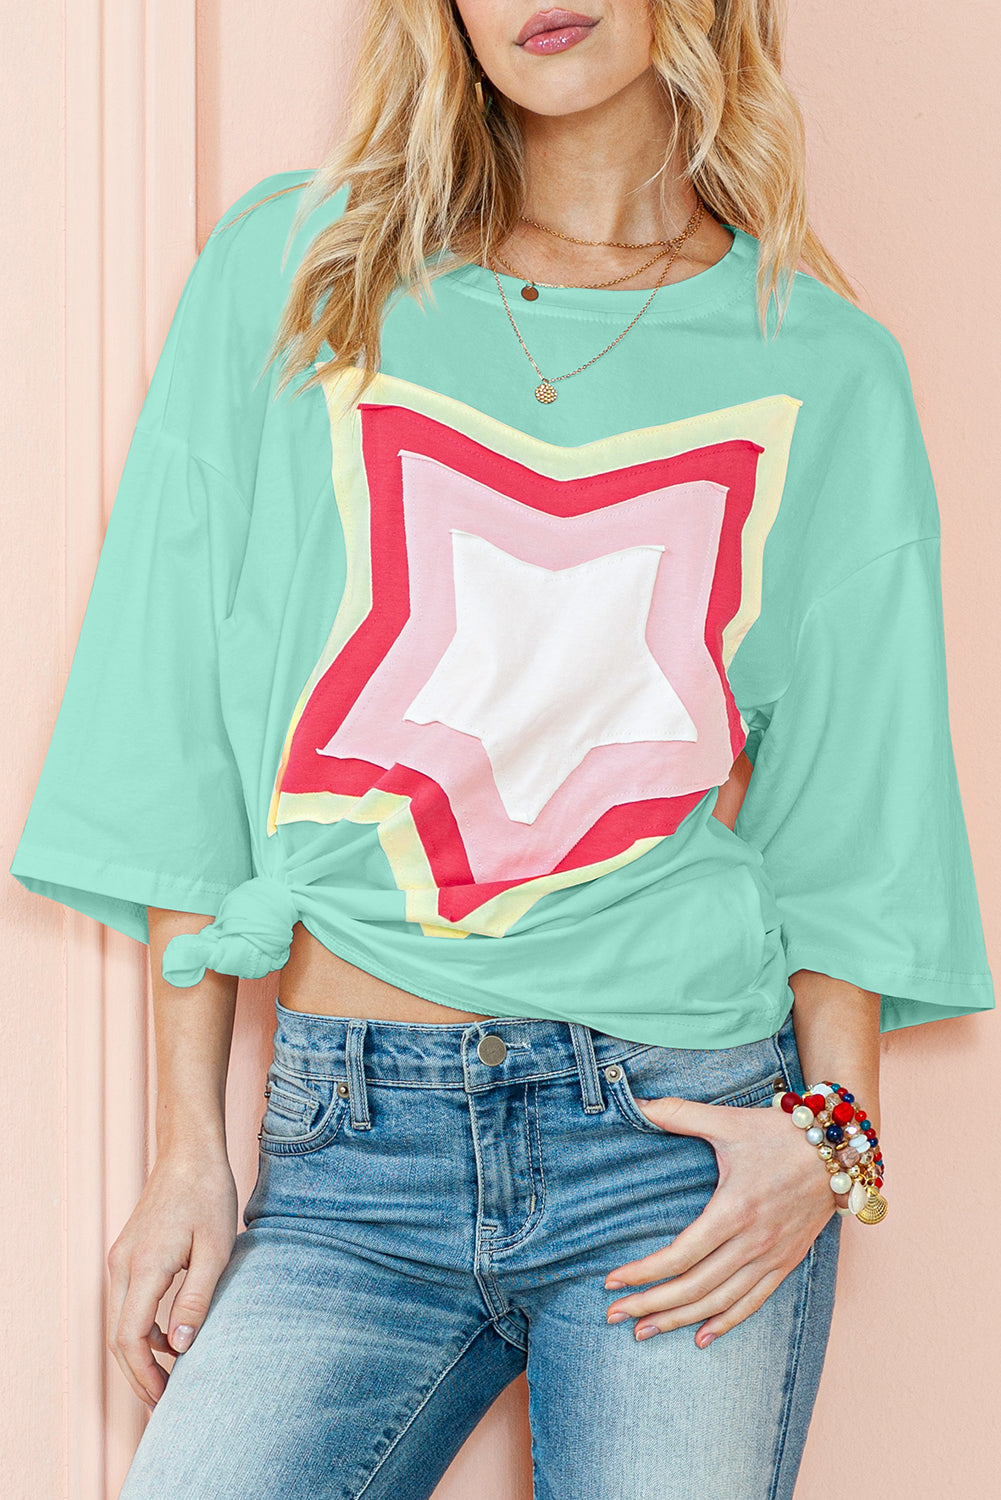 Moonlight Jade - Star Patched Half Sleeve Oversized Tee - womens t shirt at TFC&H Co.